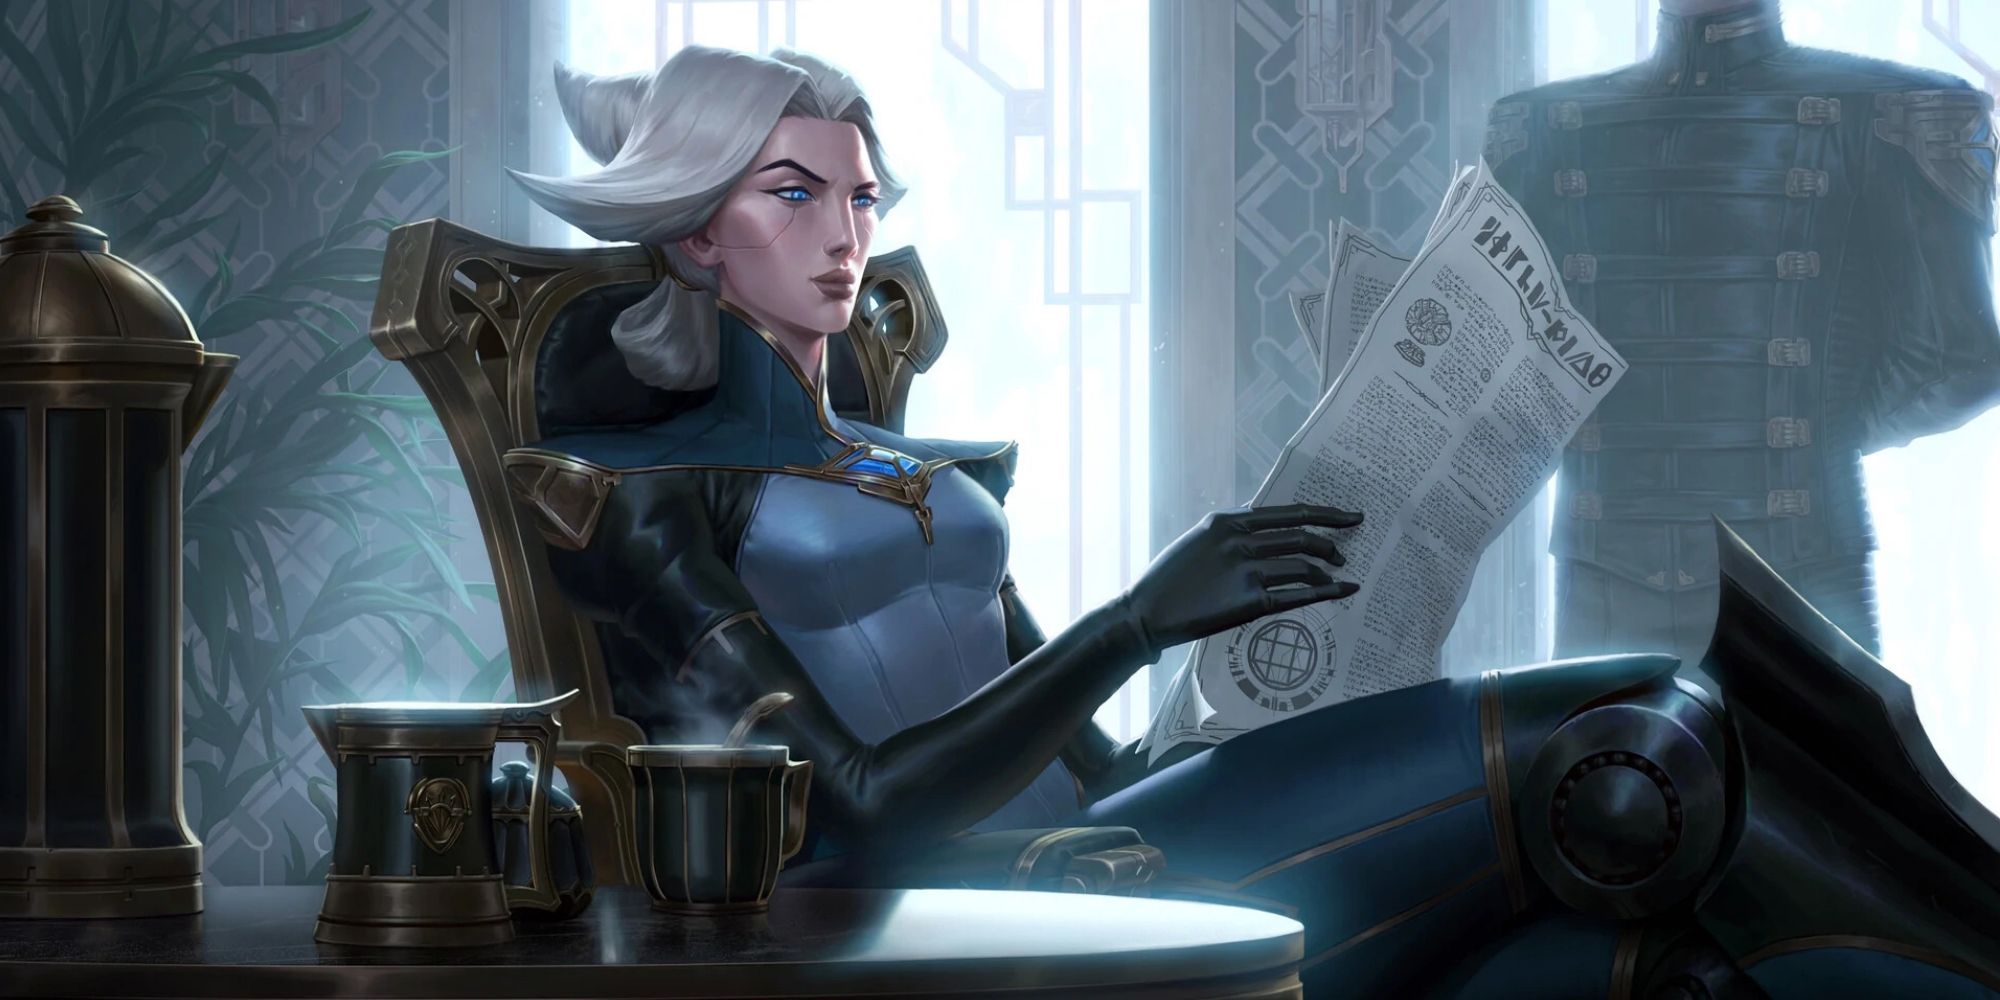 Camille ponders the morning news in her Piltover suite